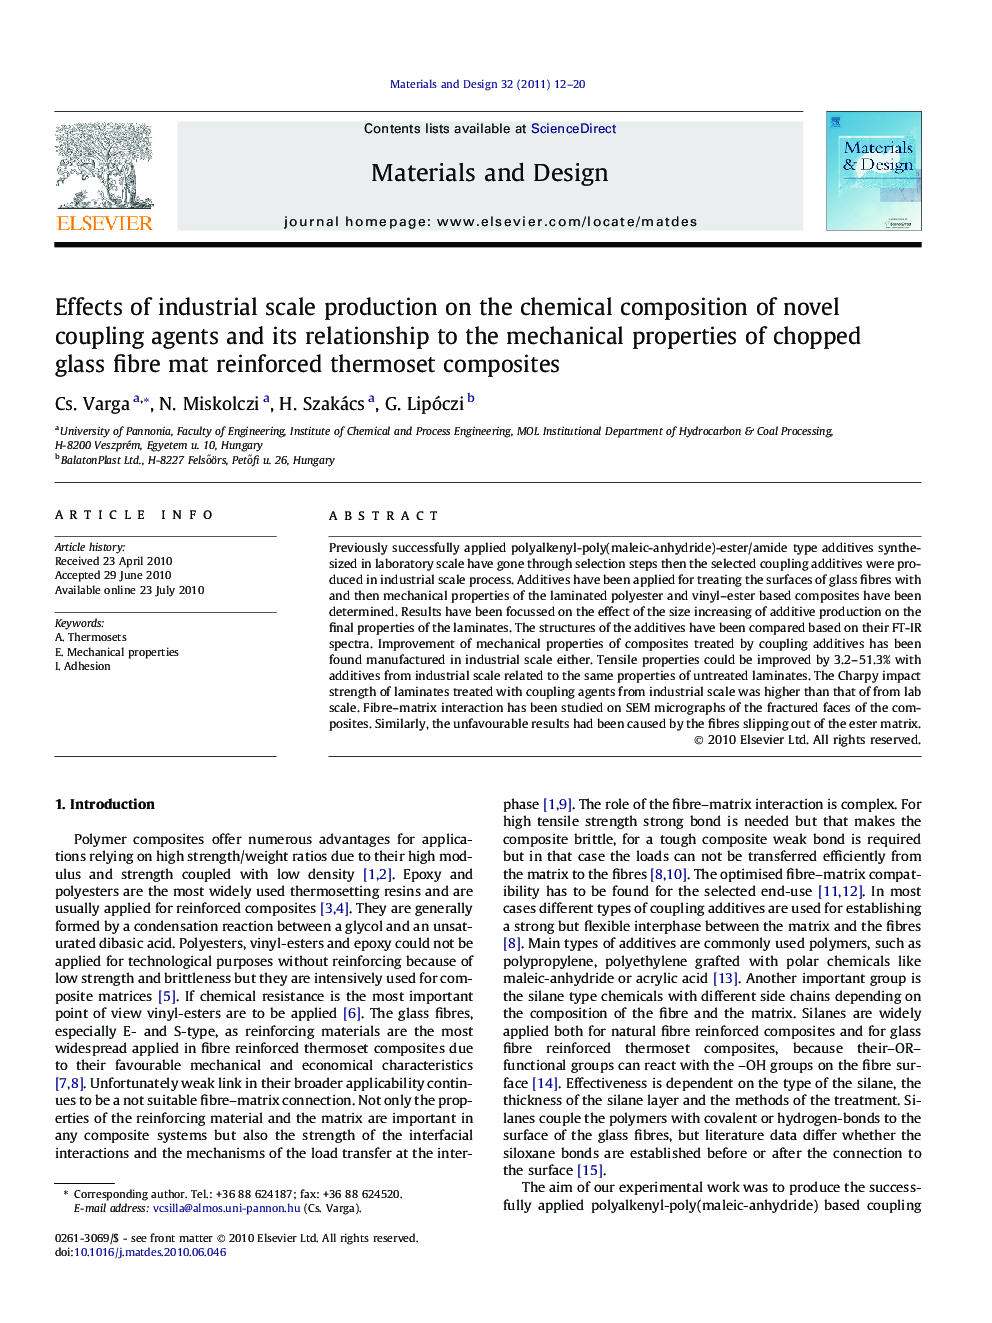 Effects of industrial scale production on the chemical composition of novel coupling agents and its relationship to the mechanical properties of chopped glass fibre mat reinforced thermoset composites